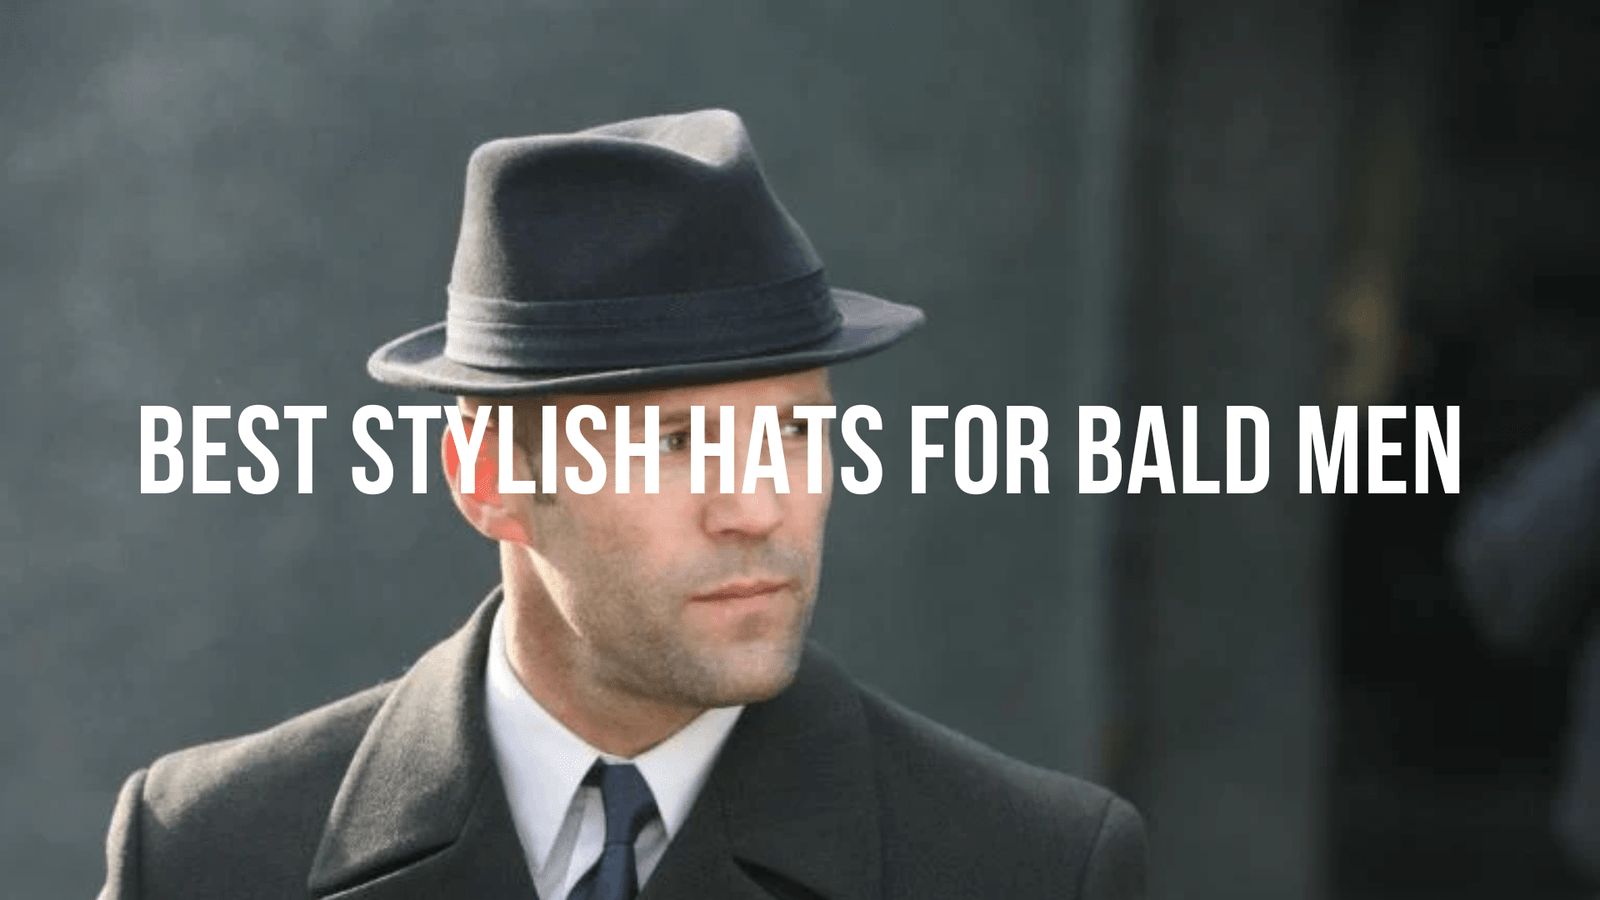 Top 5 Best Hats for Bald Men for a stylish look - BALD LIFESTYLE